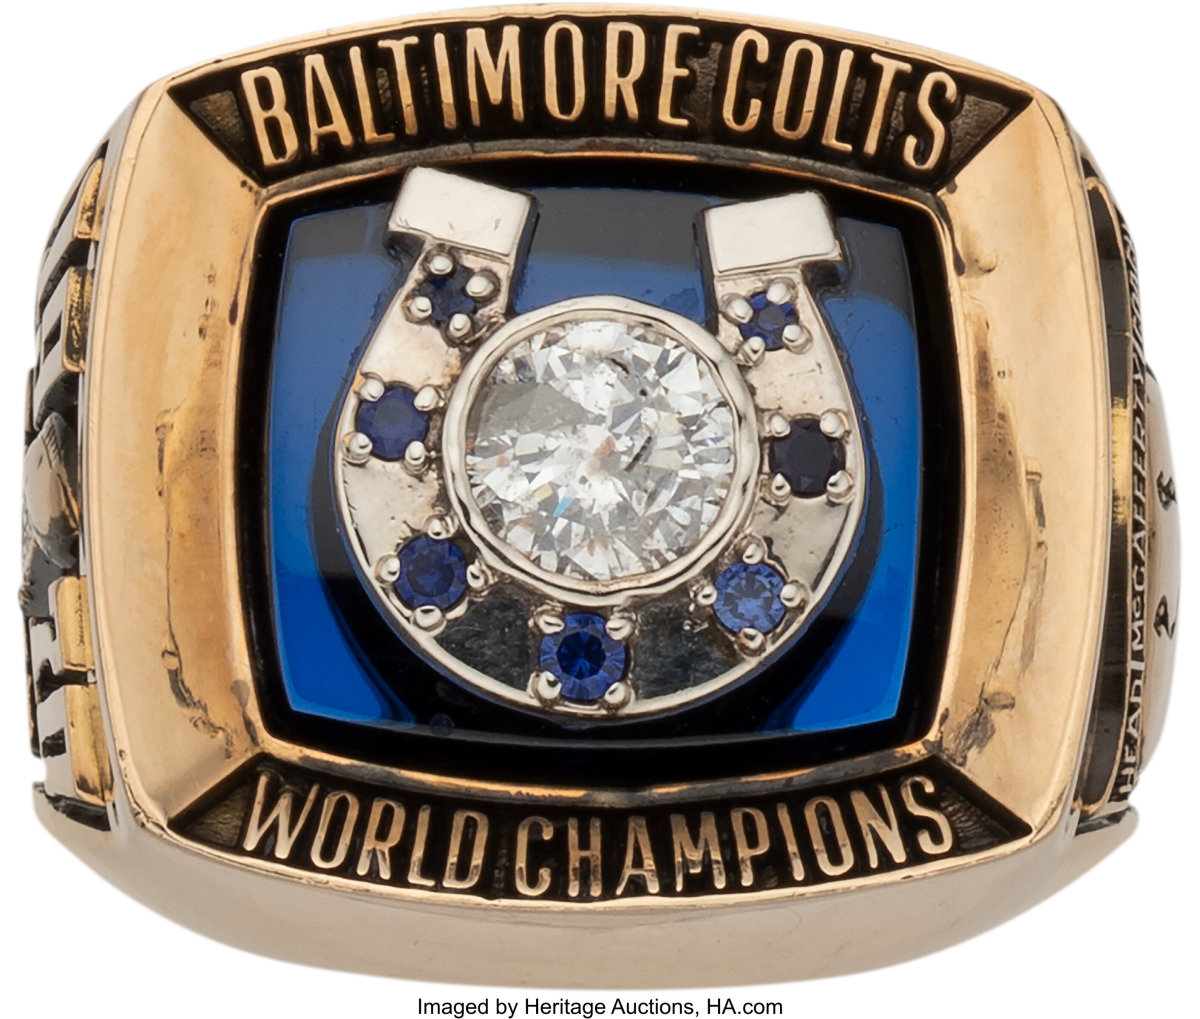 A 1970 Baltimore Colts Super Bowl V ring presented to head coach Don McCafferty.